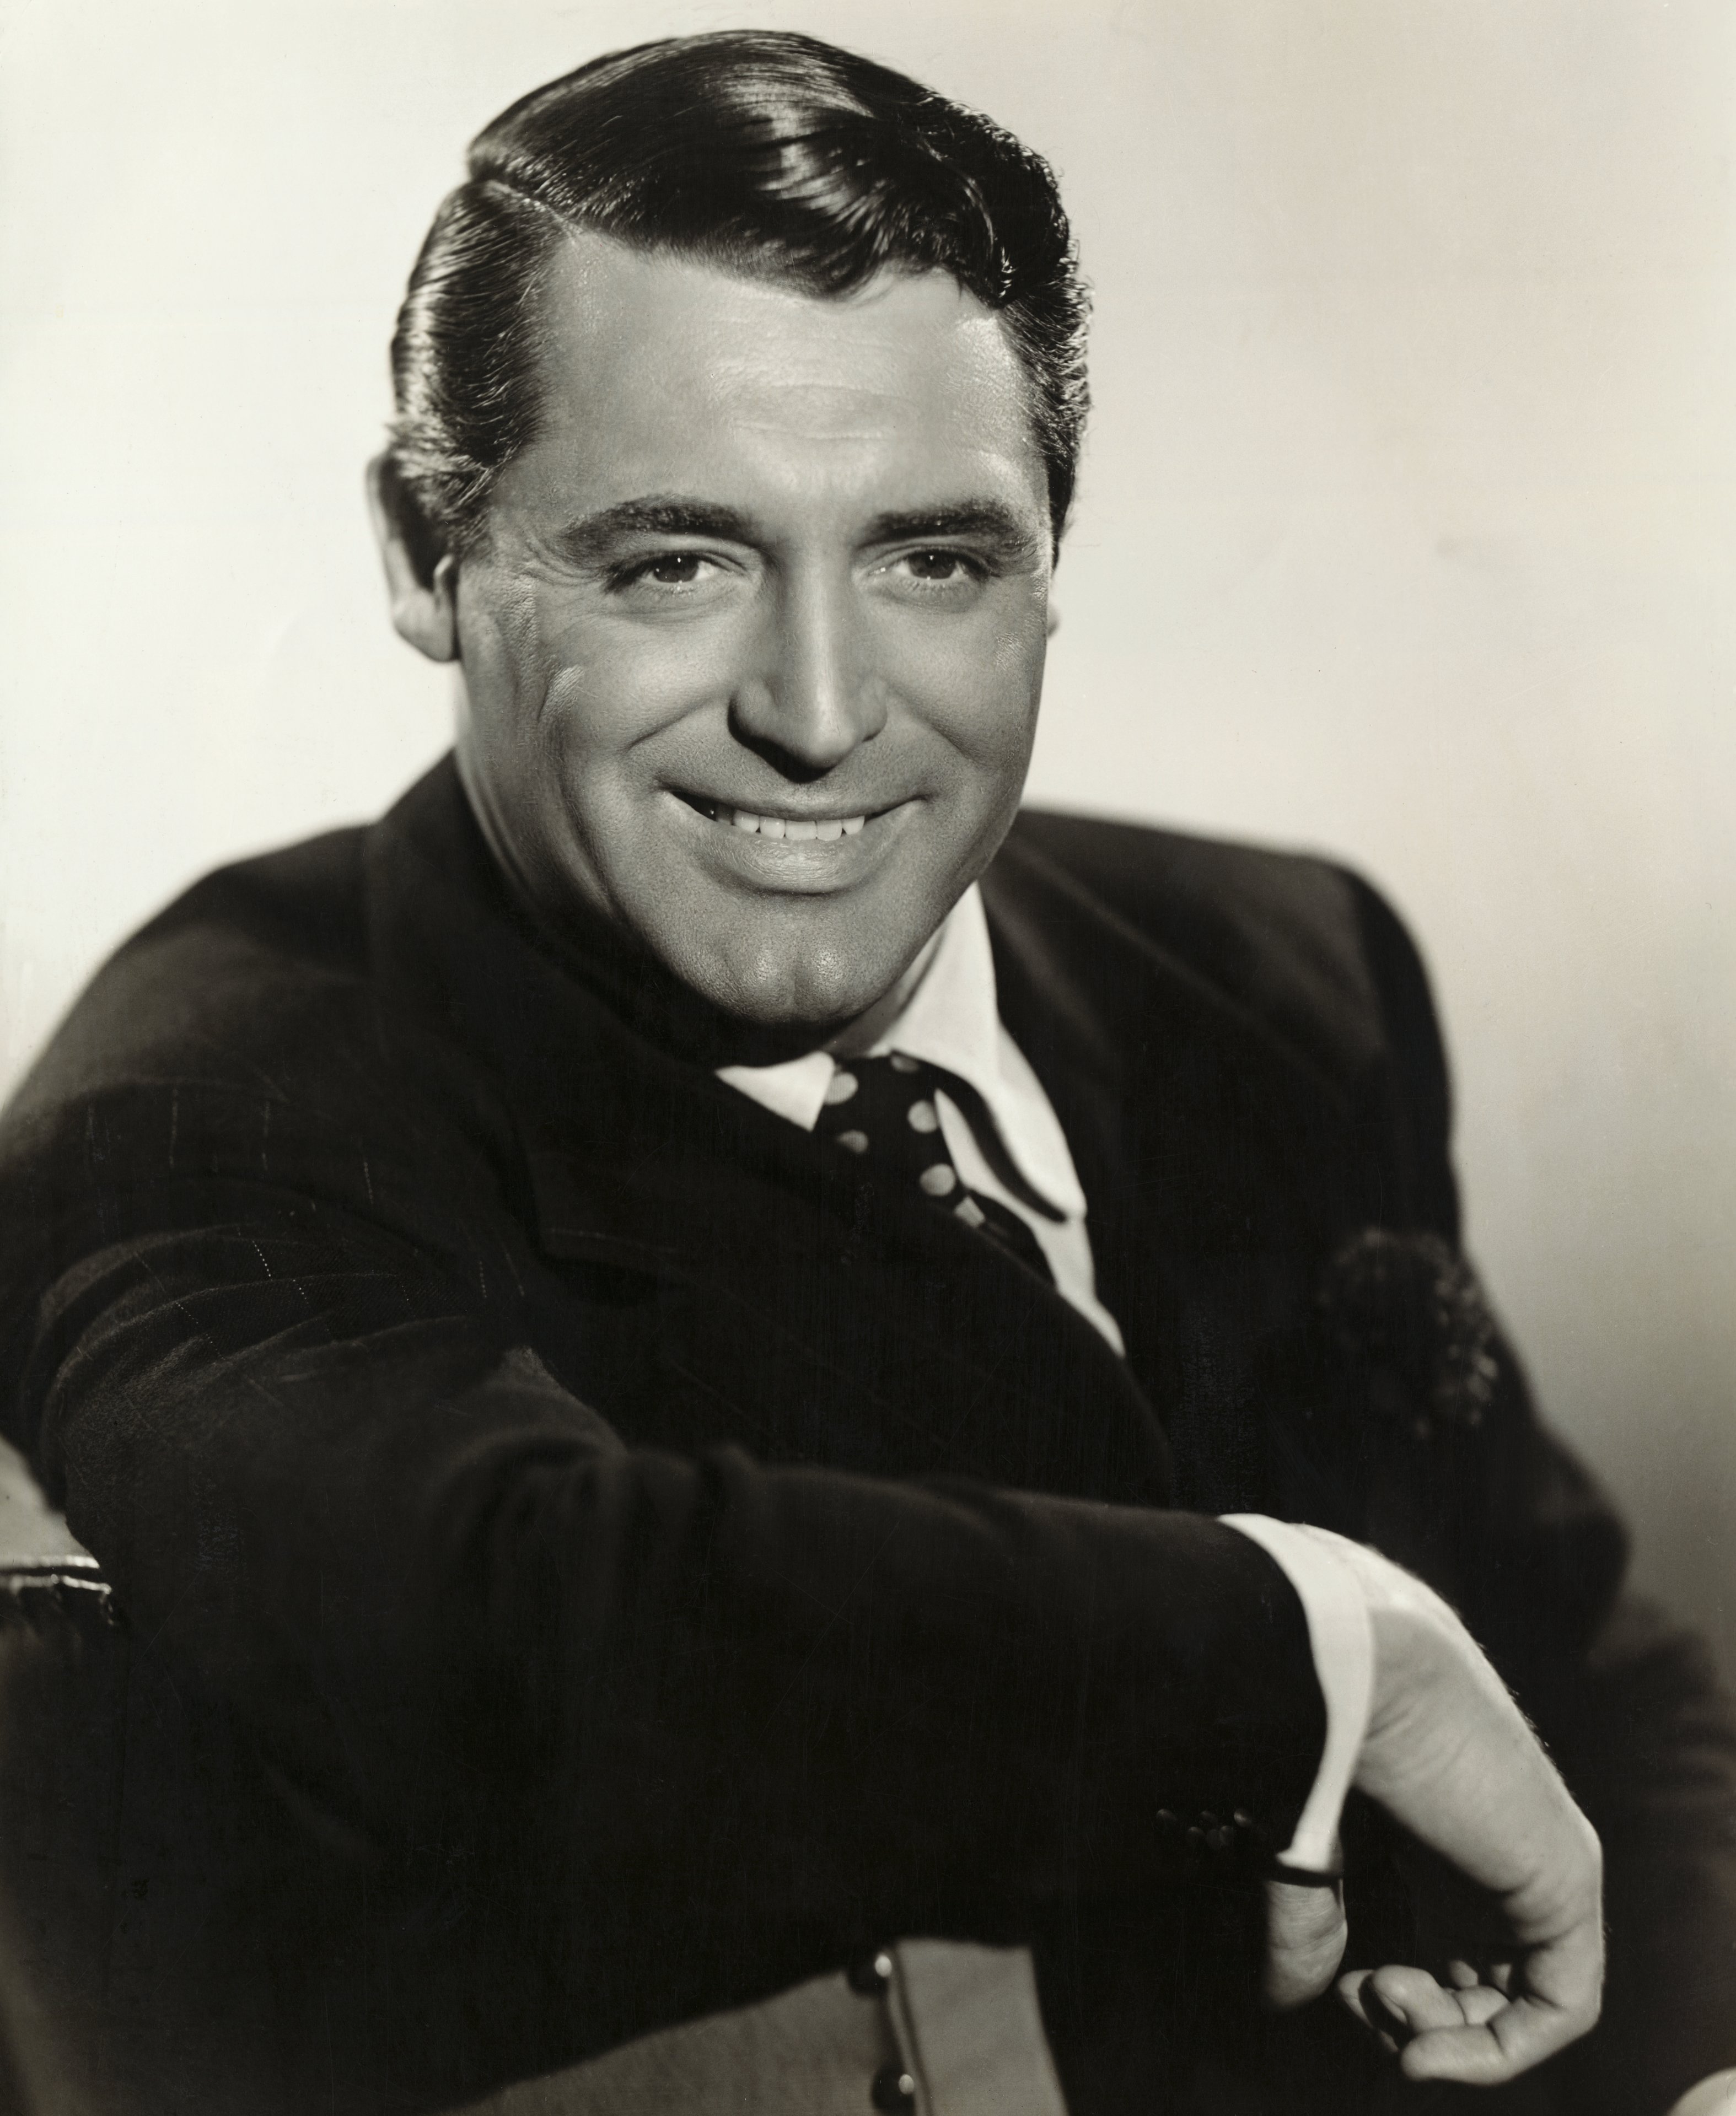 Famous actor Cary Grant in the 1930s | Source: Getty Images